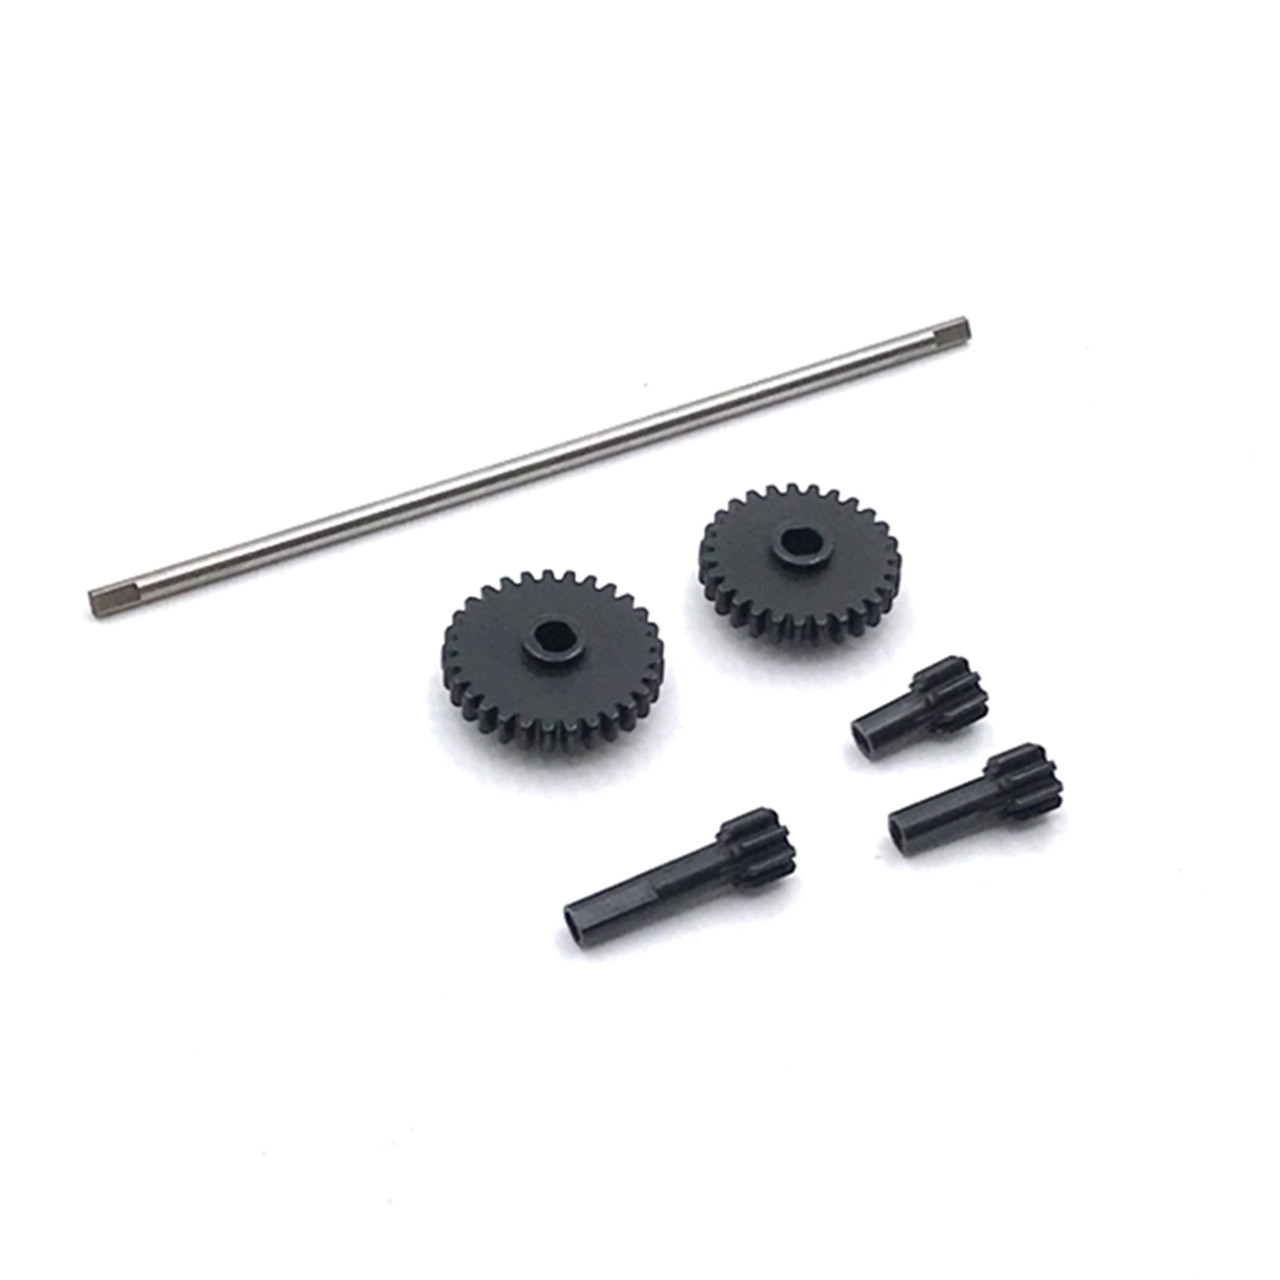 Steel Differential Driving Gear Set For Wltoys 1/28 RC Car 284131 K979 K989 K999